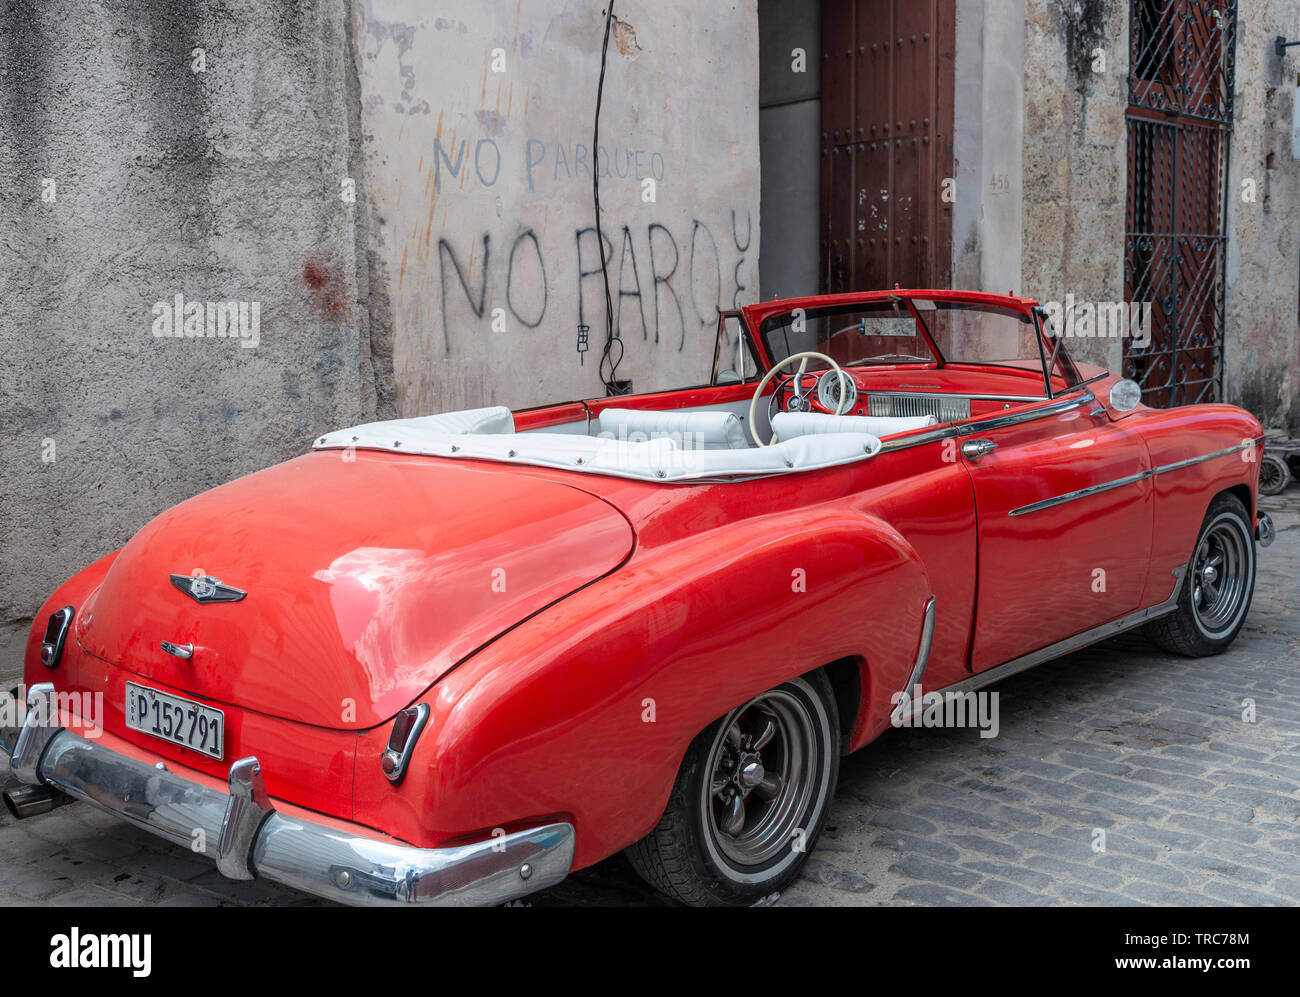 Classic American 1950's red car parked up beside a no parking sign on one of the streets in the Old Town  of Havana (Habana Vieja)  Cuba, Caribbean Stock Photo